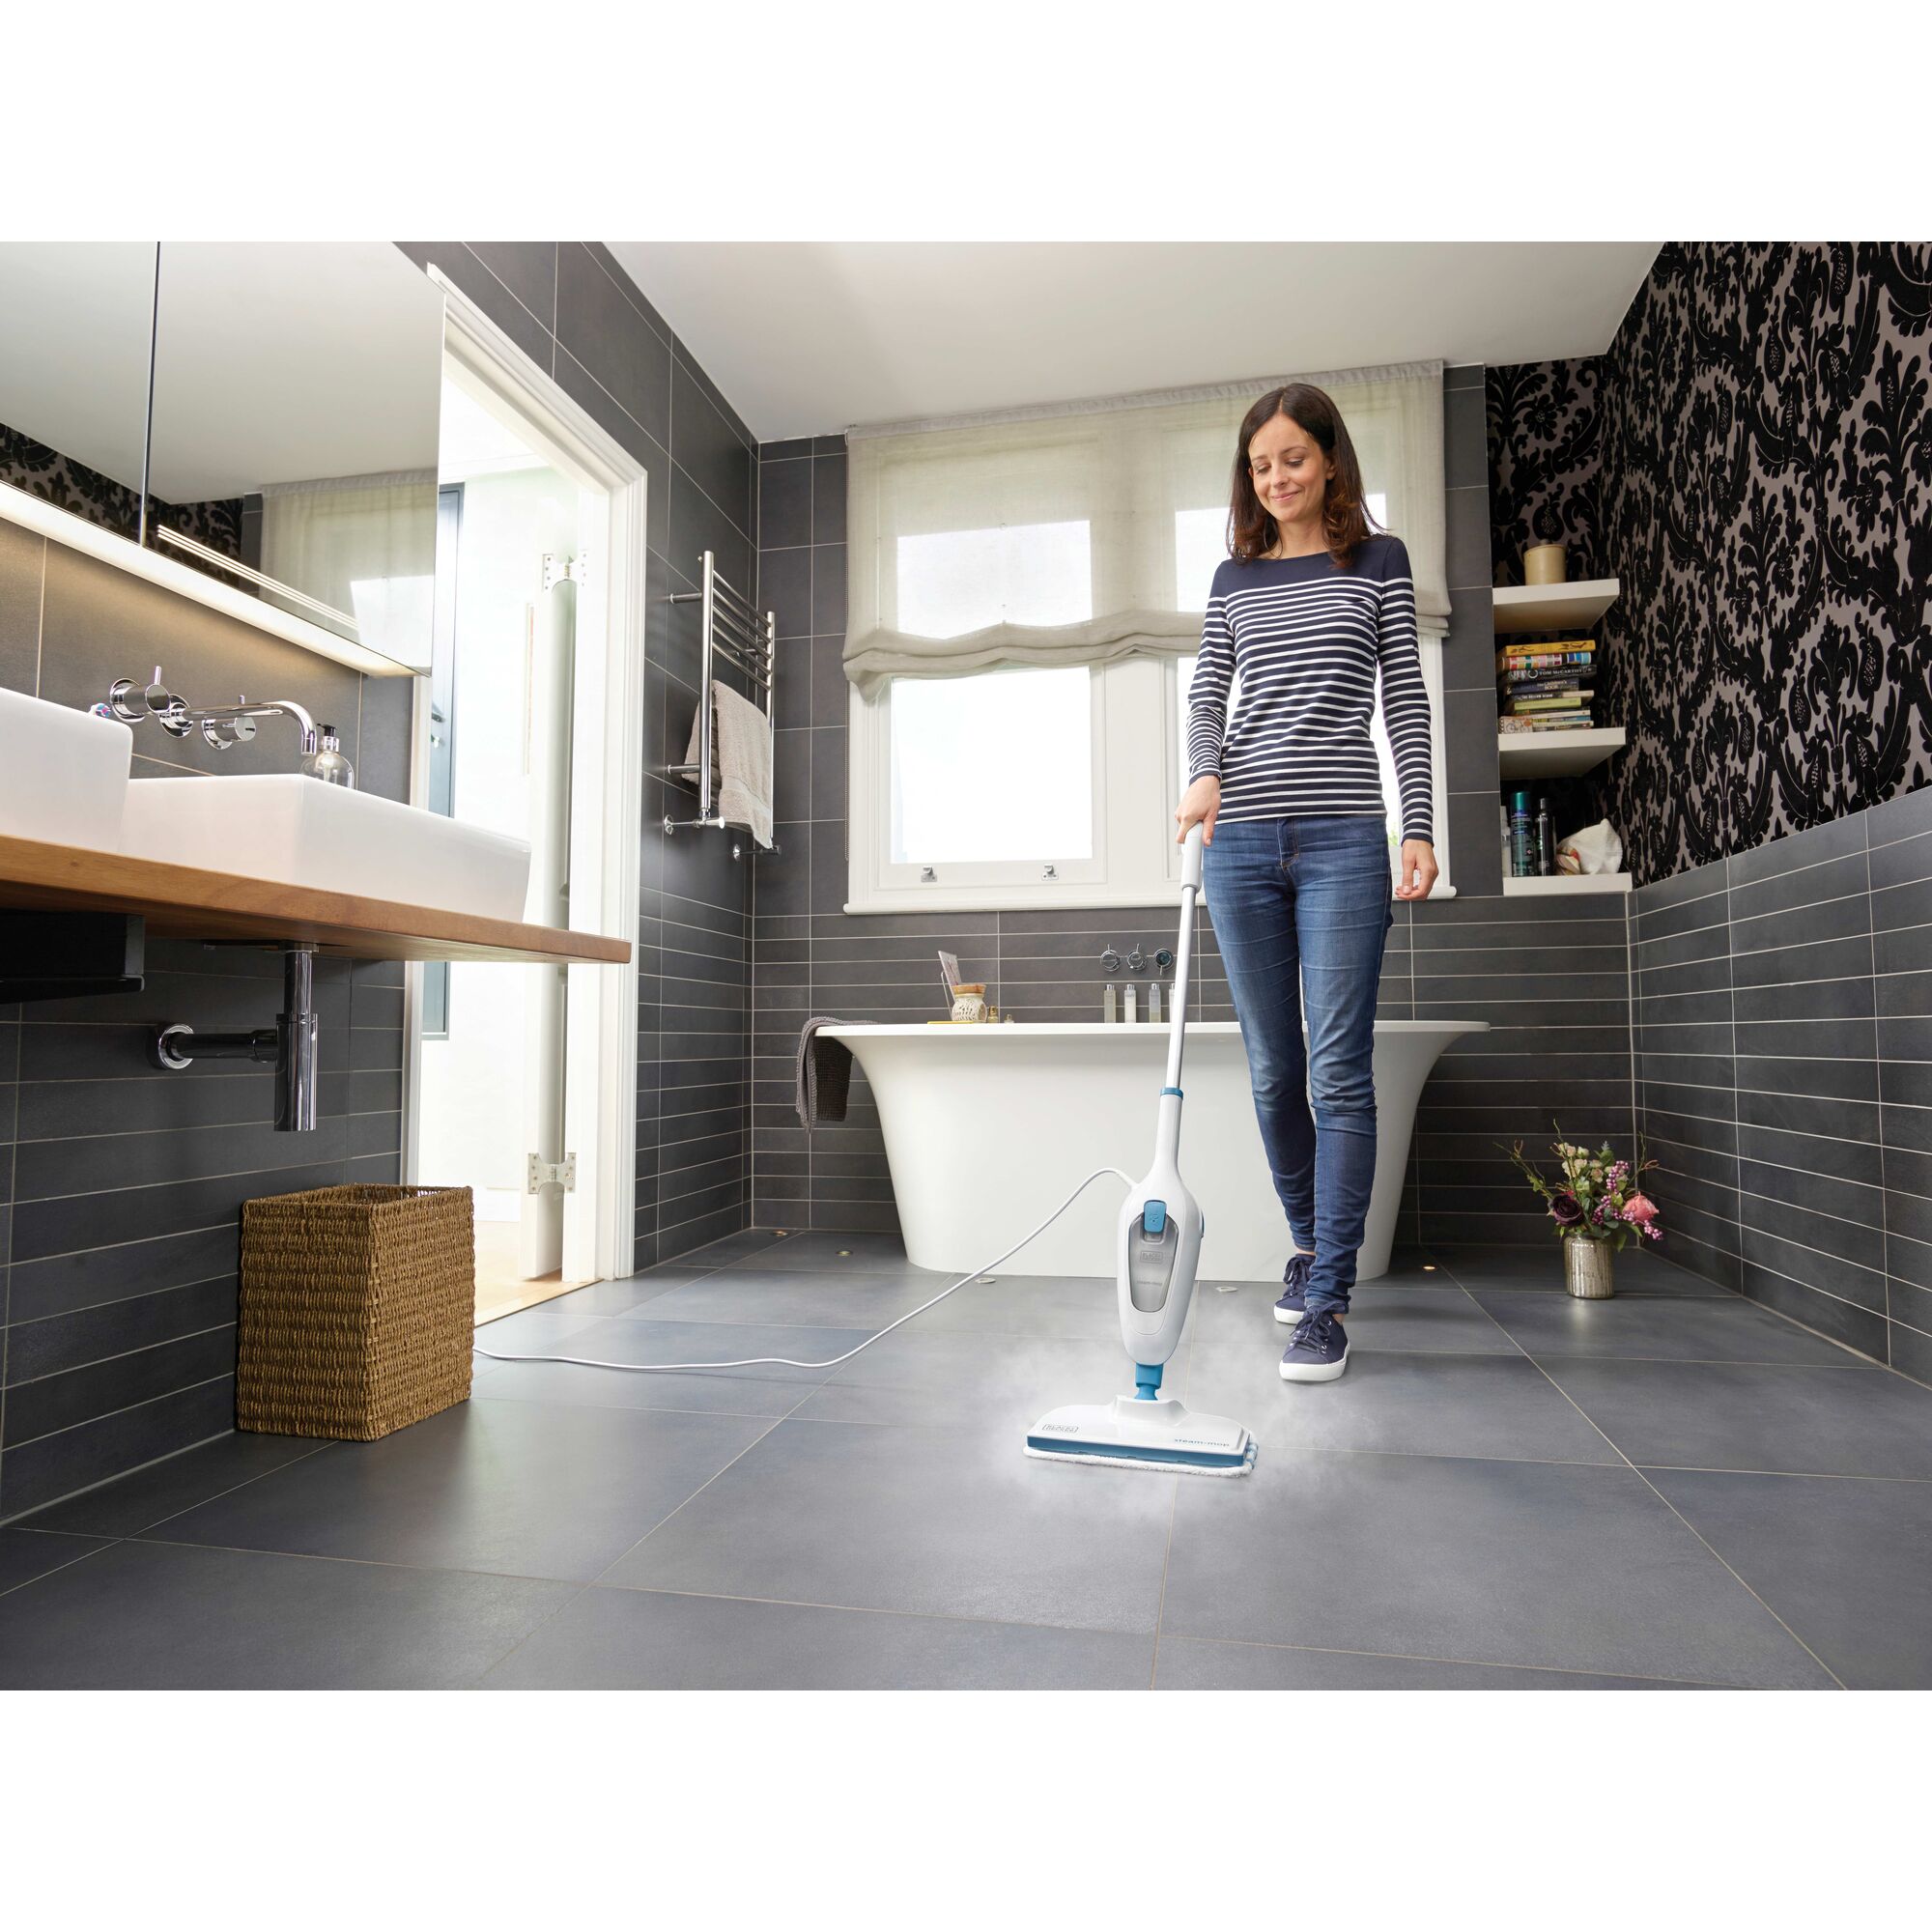 Classic Steam Mop being used by a person to clean bathroom floor.